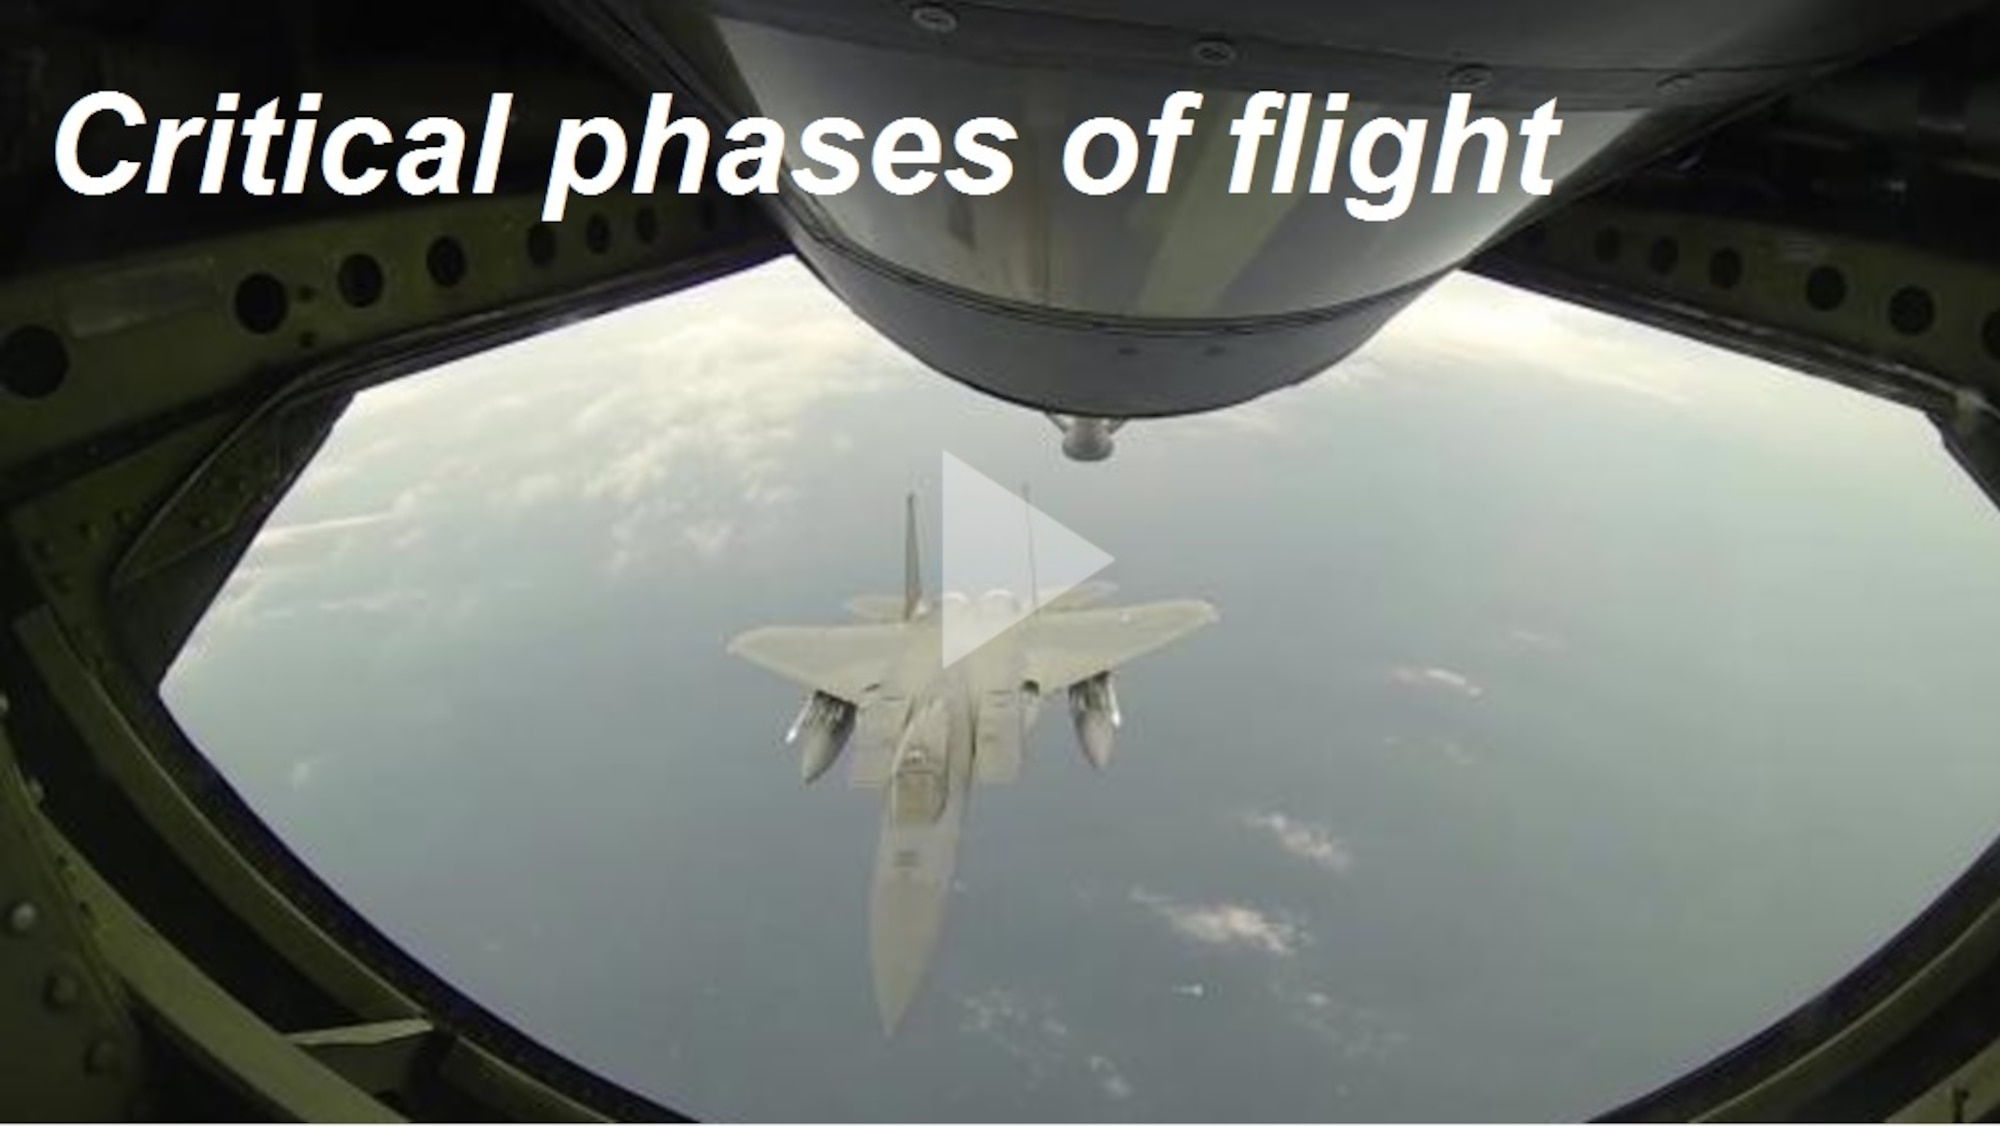 Critical phases of flight